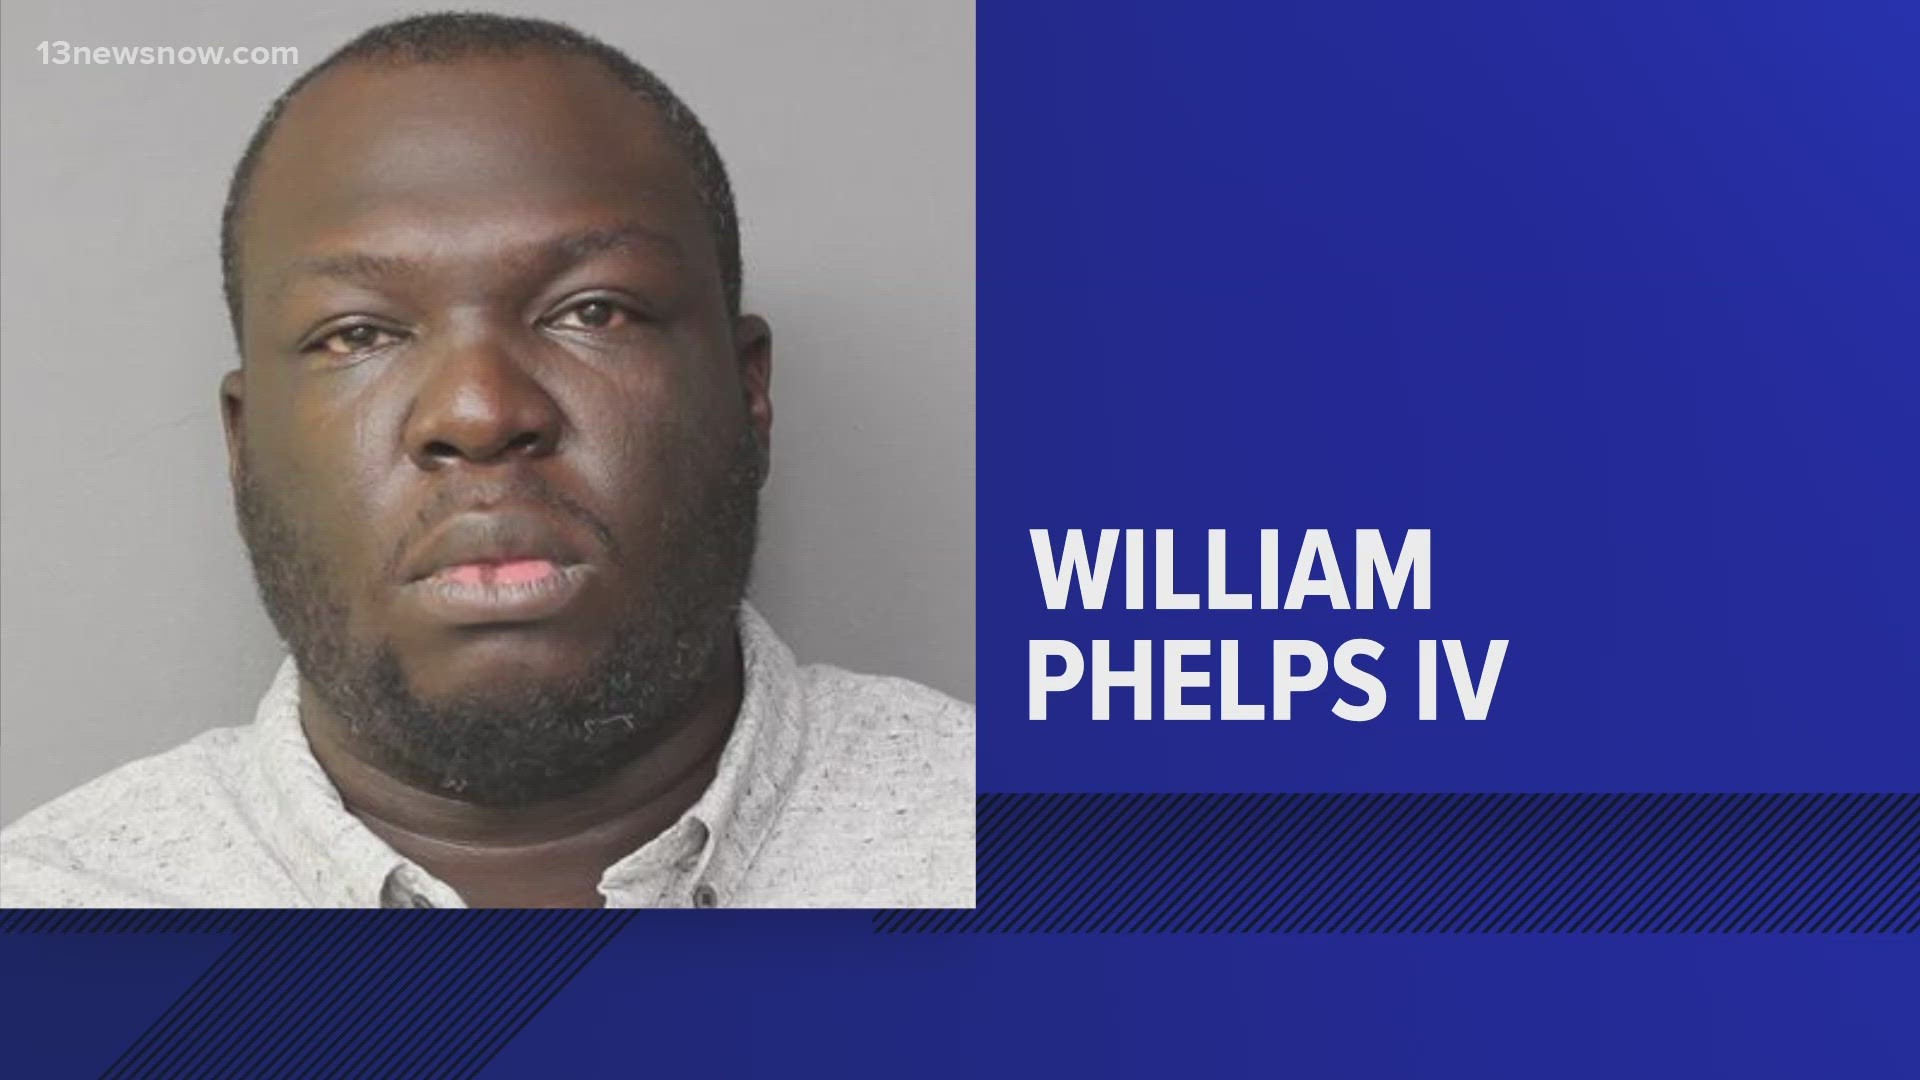 Police arrested the man last October after fingerprints and DNA evidence connected him to several assaults in Norfolk and one in Chesapeake.